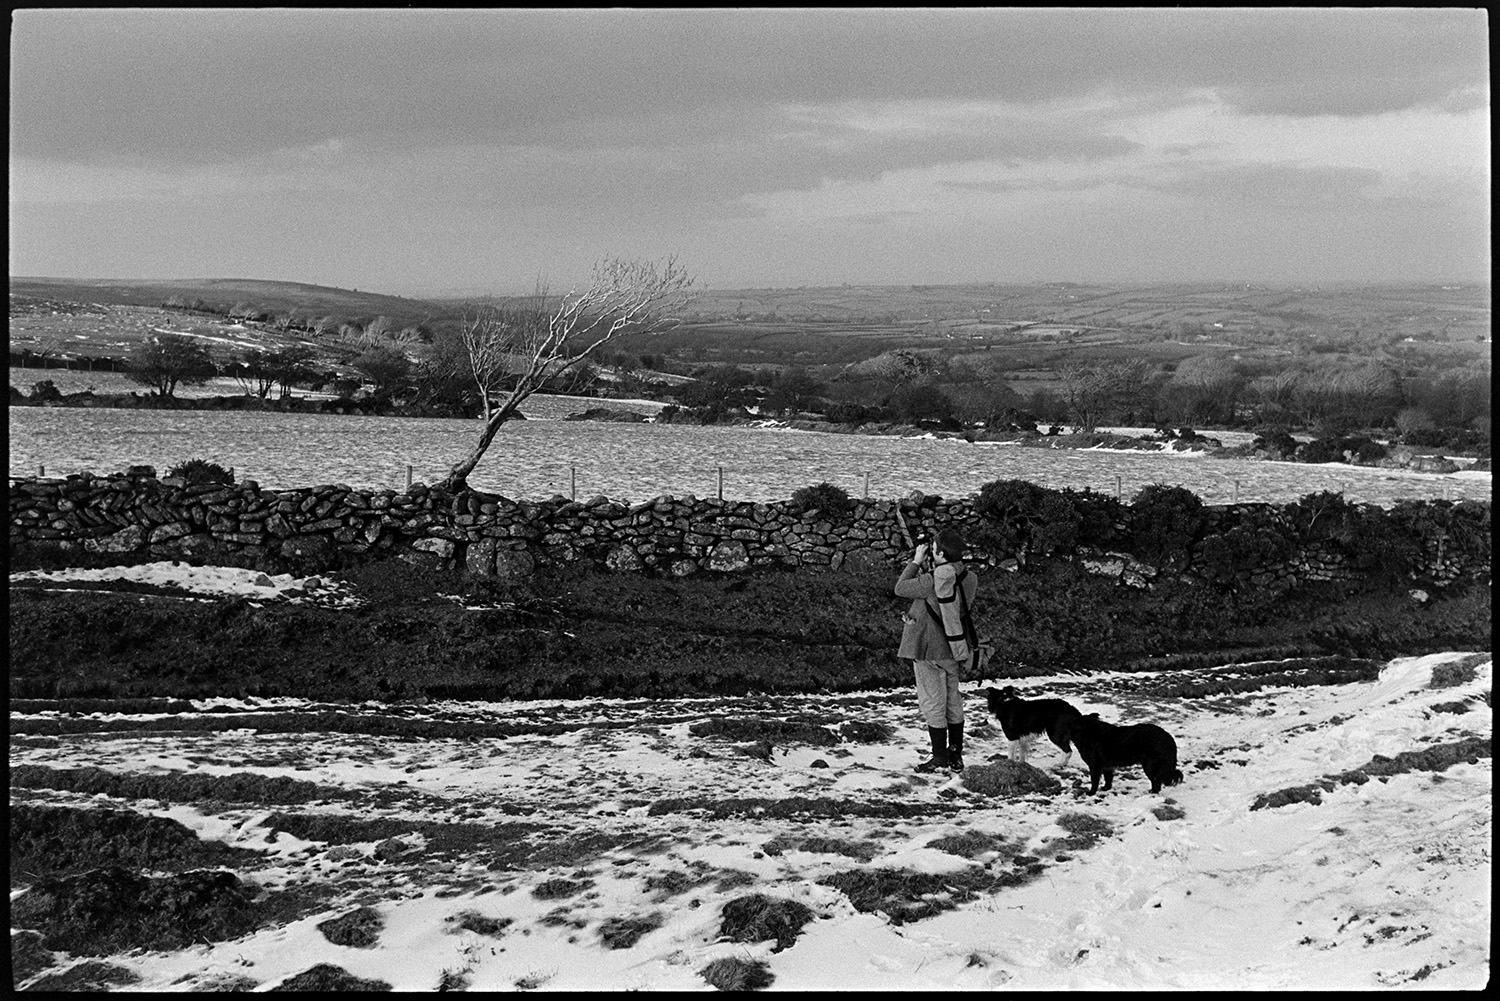 Snow on moor, man with dogs. 
[Chris Chapman taking a photograph o a view near Gidleigh on Dartmoor with a dry stone wall, trees and snow covered fields. He is accompanied by two dogs.]